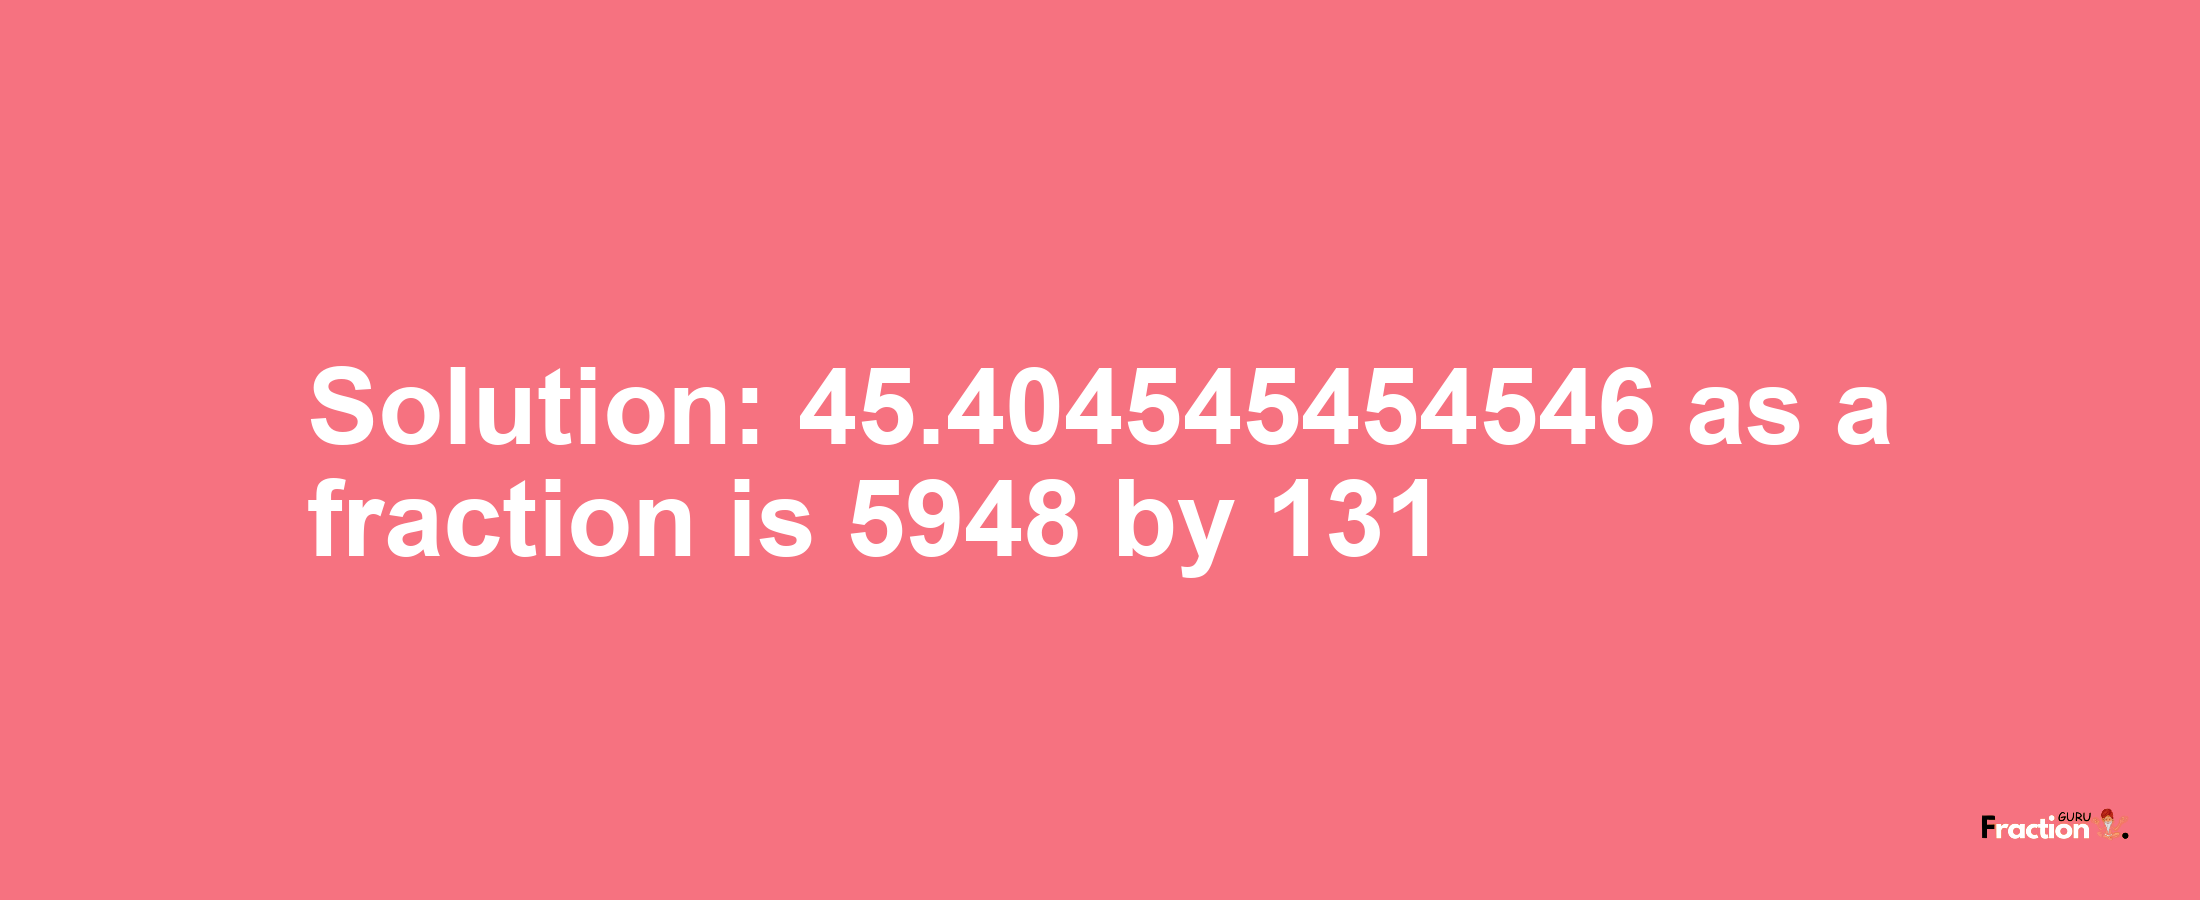 Solution:45.404545454546 as a fraction is 5948/131